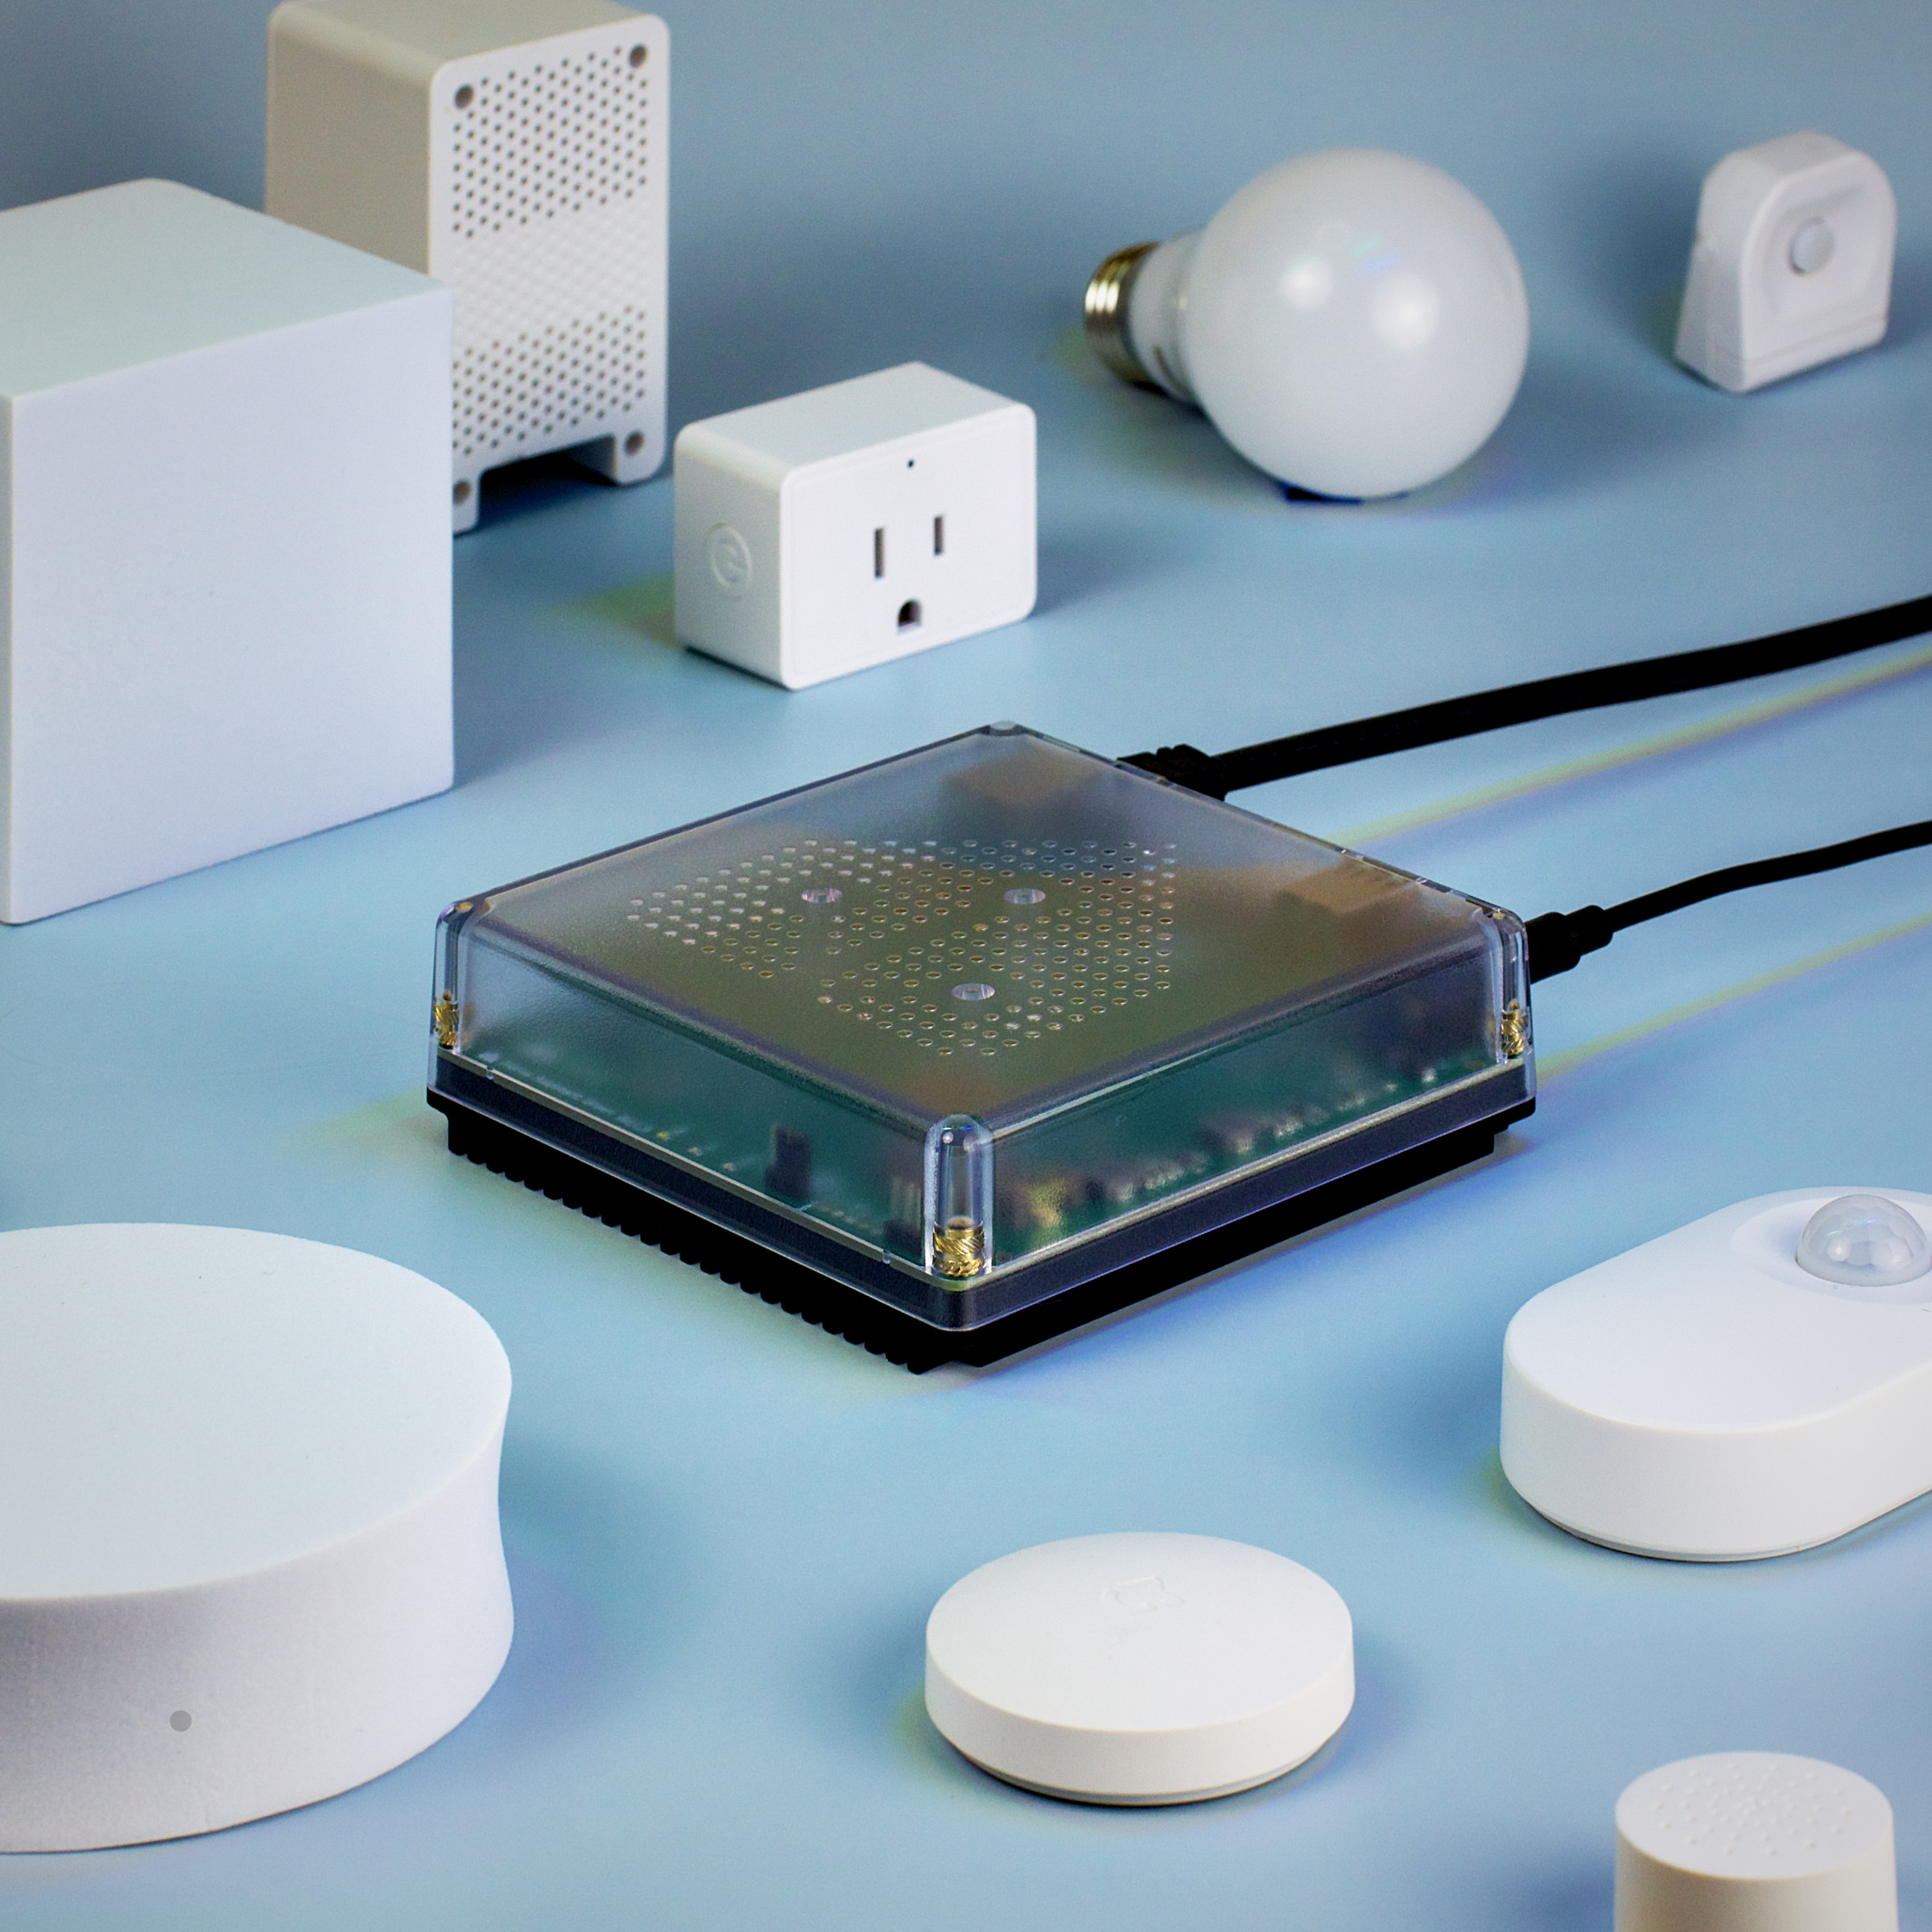 A Home Assistant Green box surrounded by smart plugs, lights, sensors, and other gadgets.